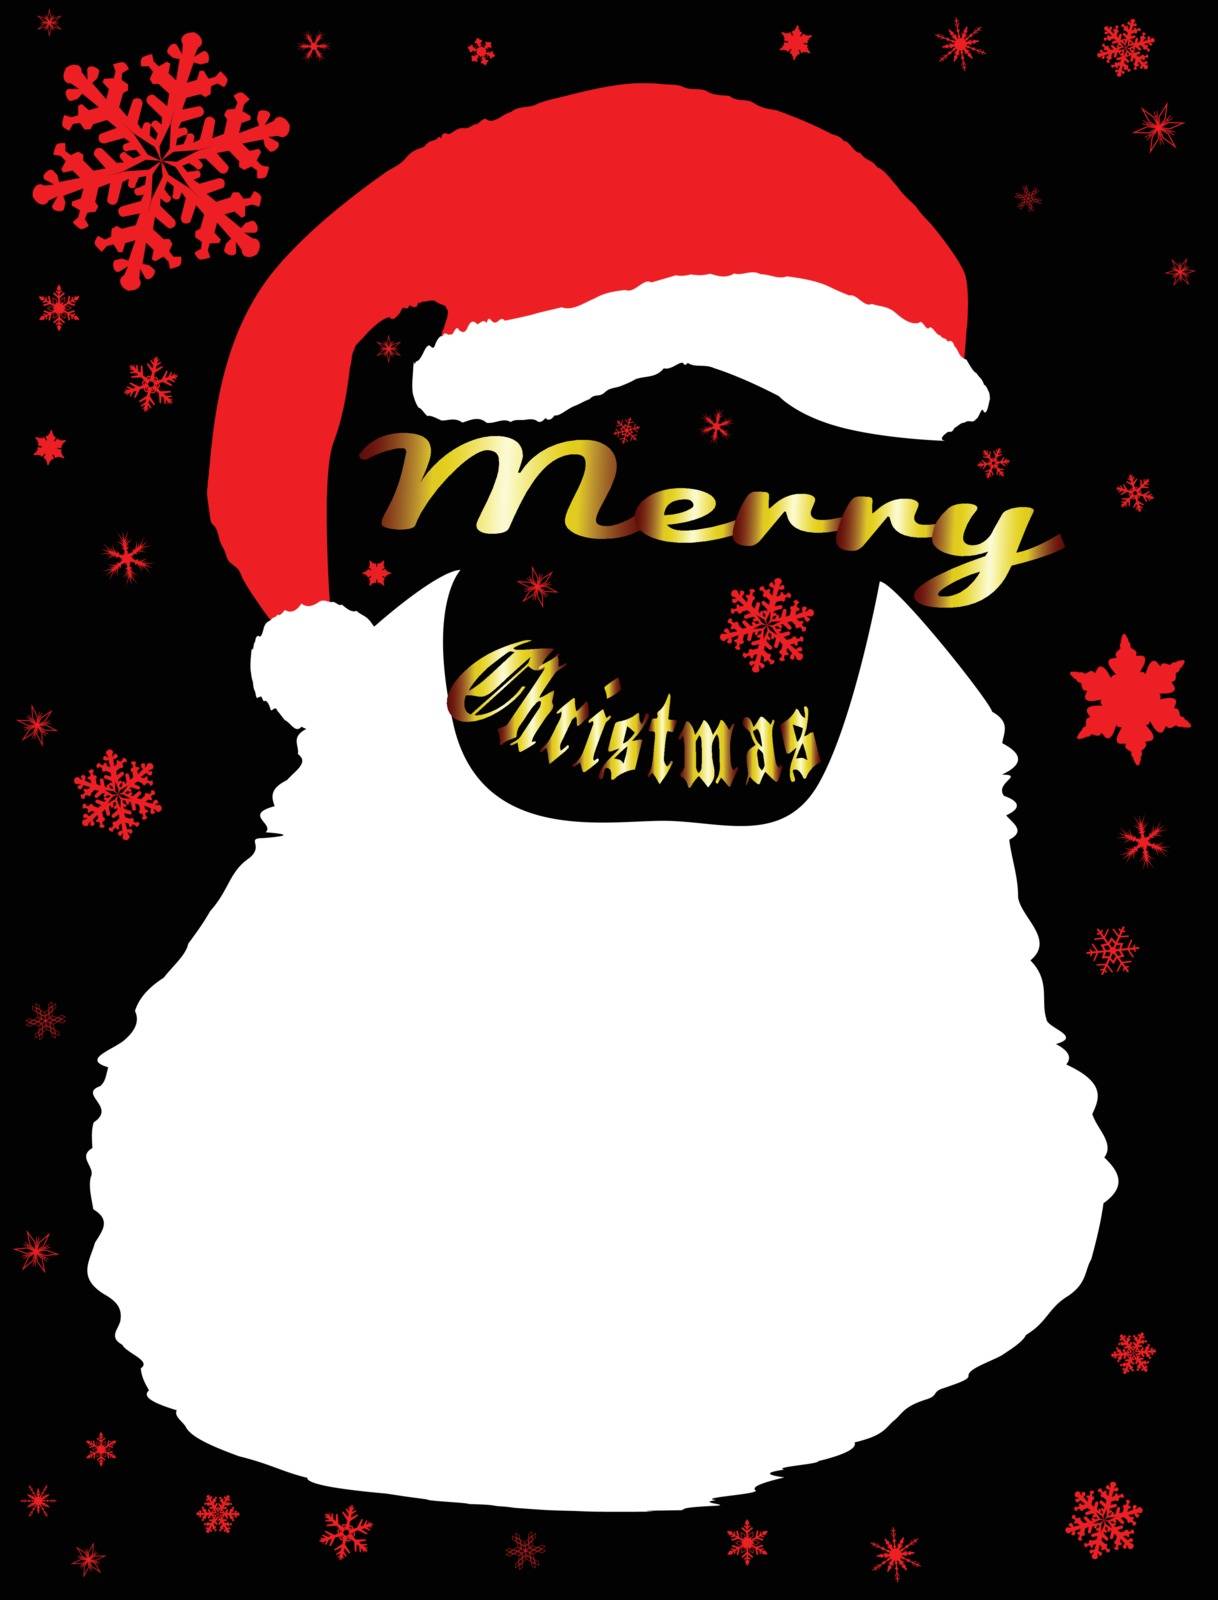 A Father Christmas red hat and beard set on a black background with snowflakes and merry Christmas text